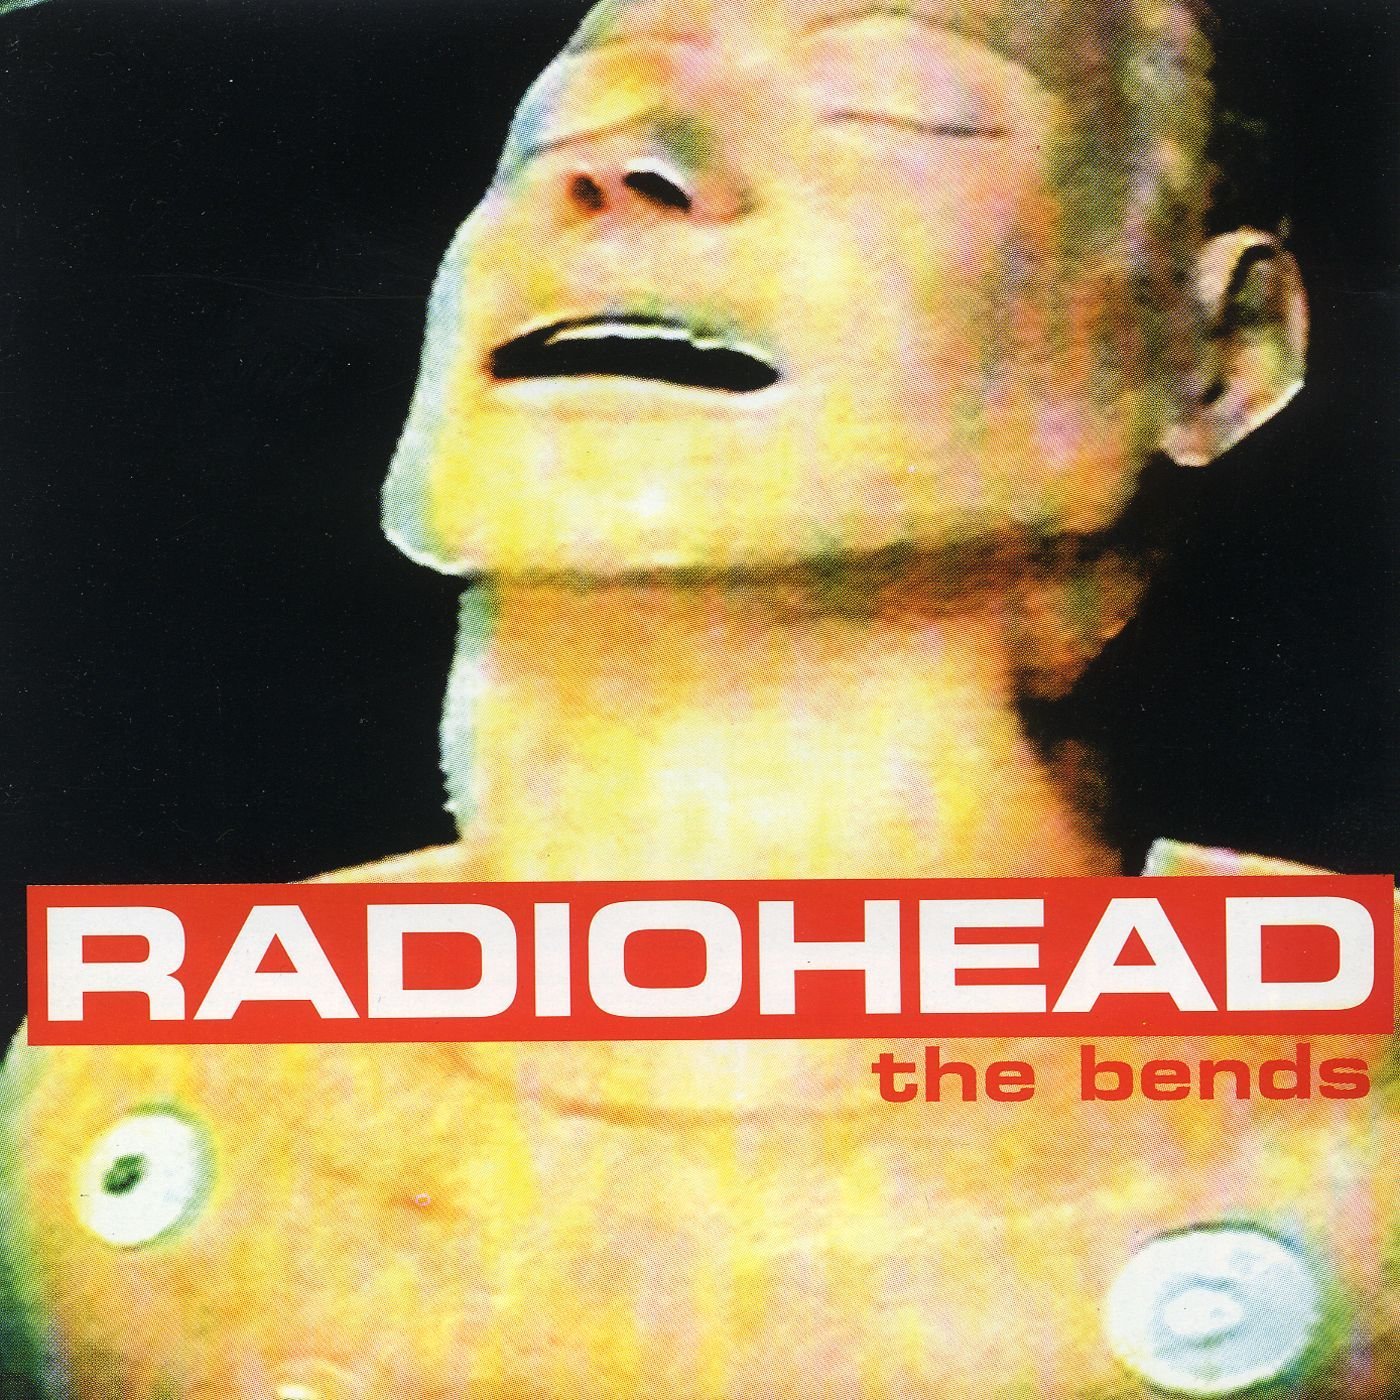 Radiohead - The Bends (Reissue) - CD